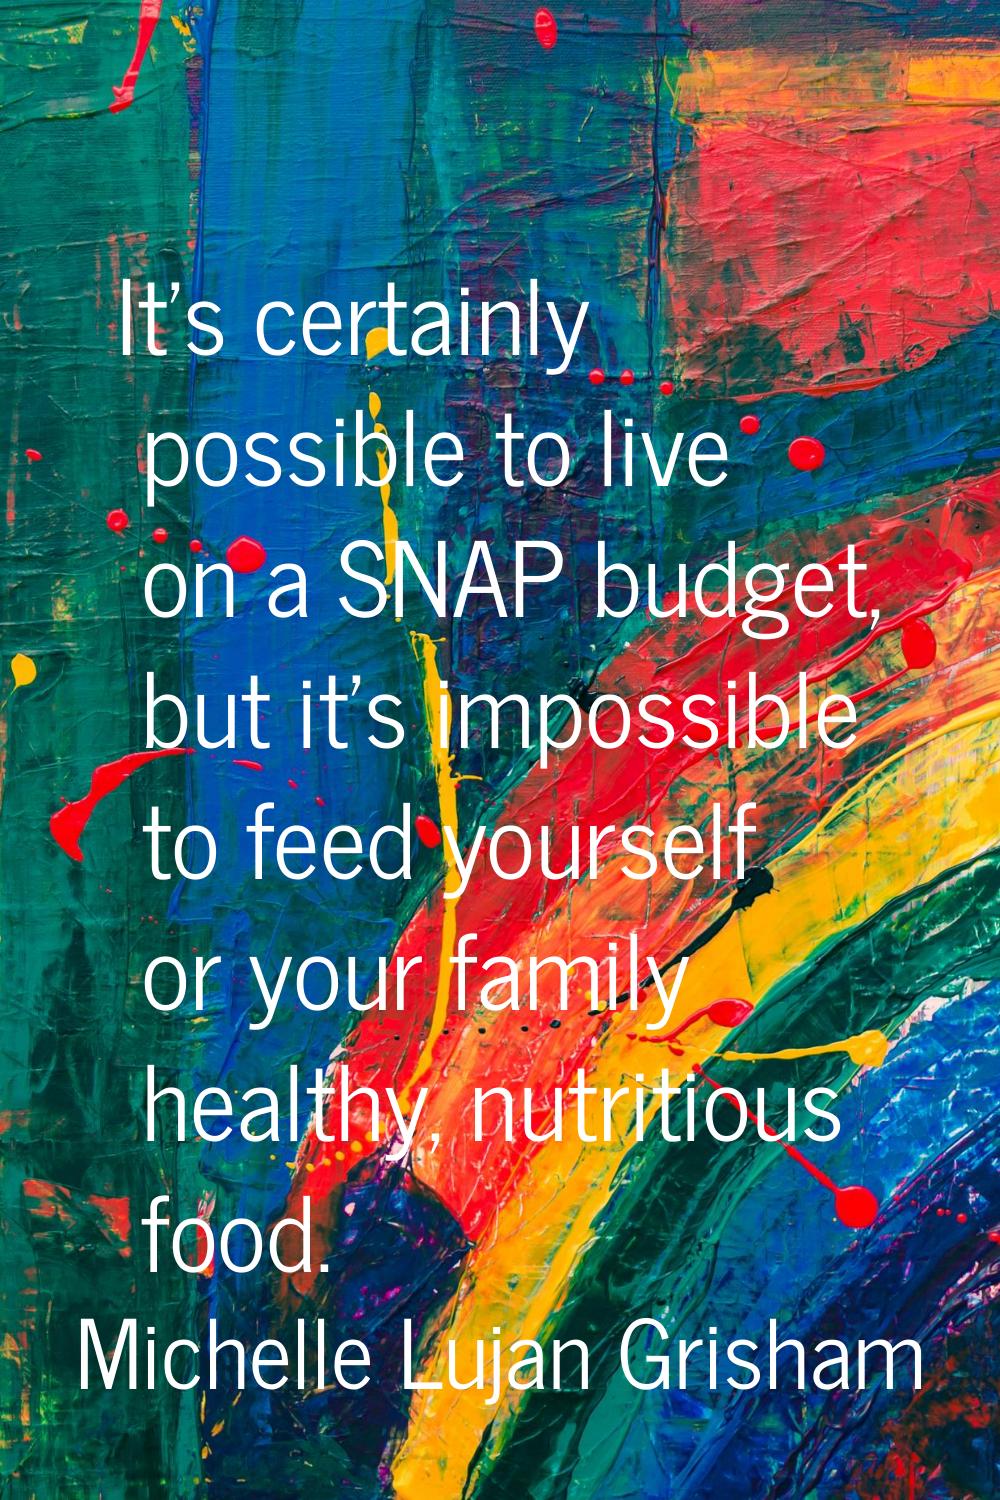 It's certainly possible to live on a SNAP budget, but it's impossible to feed yourself or your fami